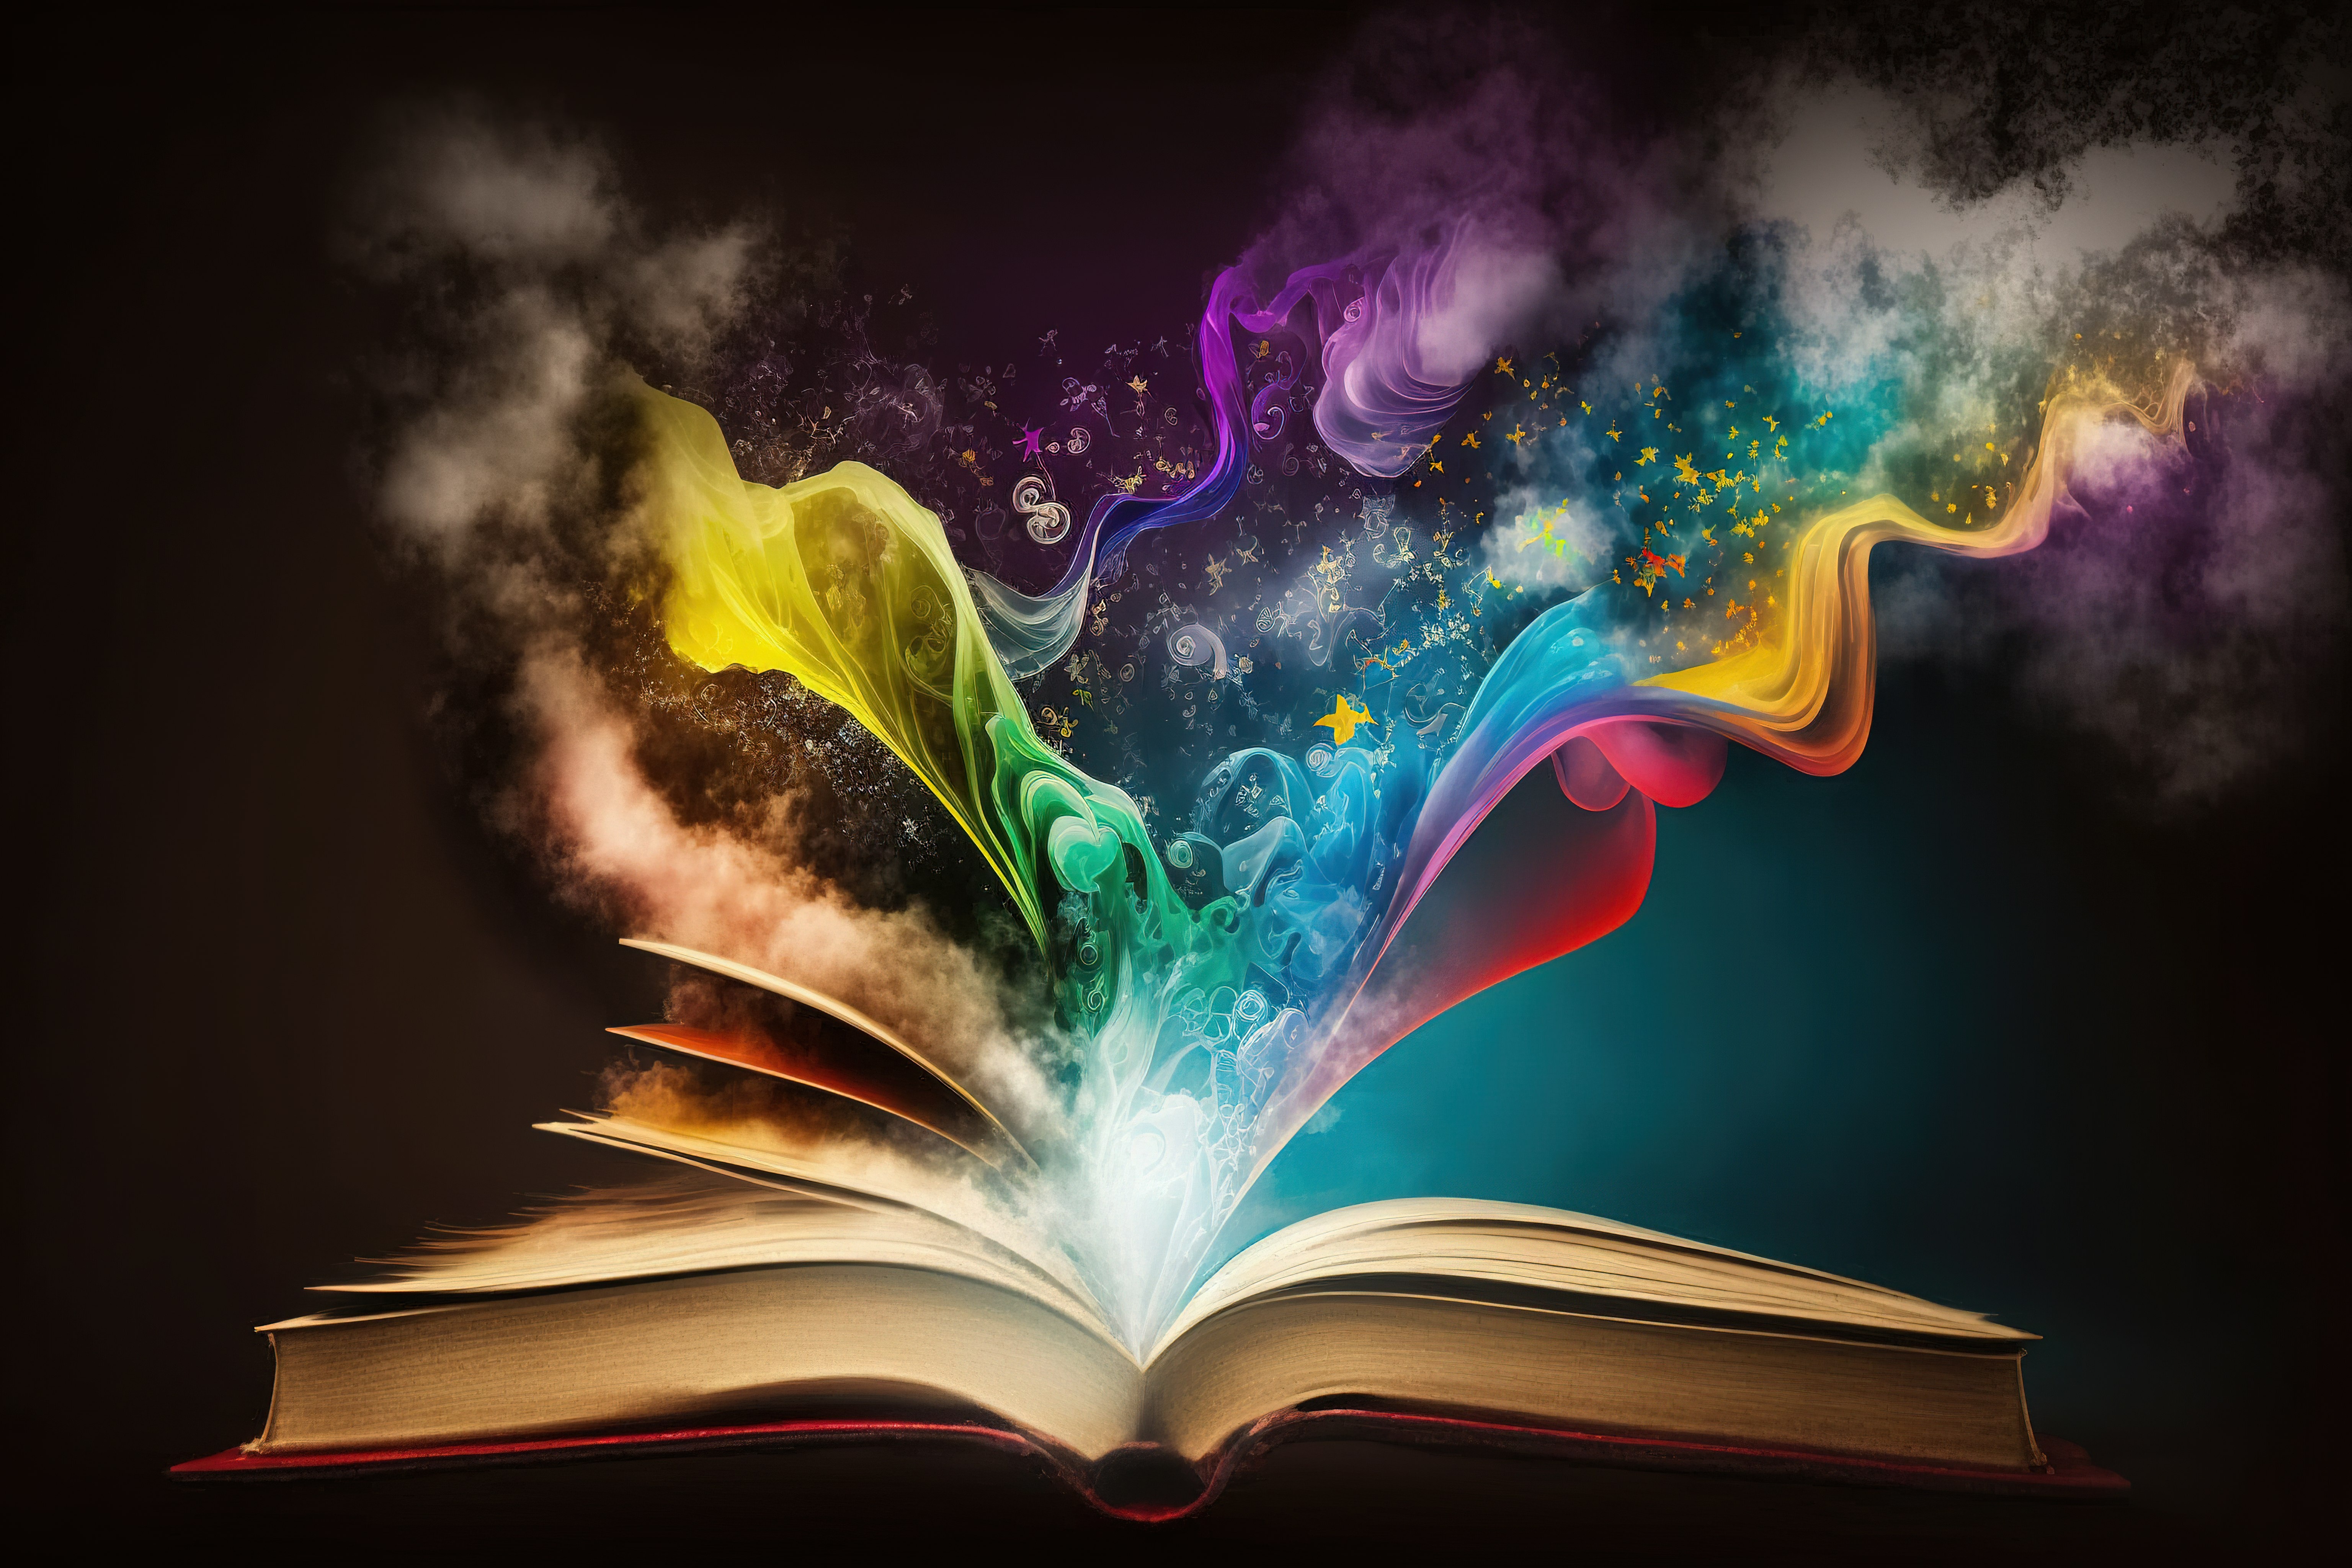 Book with magic rainbow light flowing in a lined mist